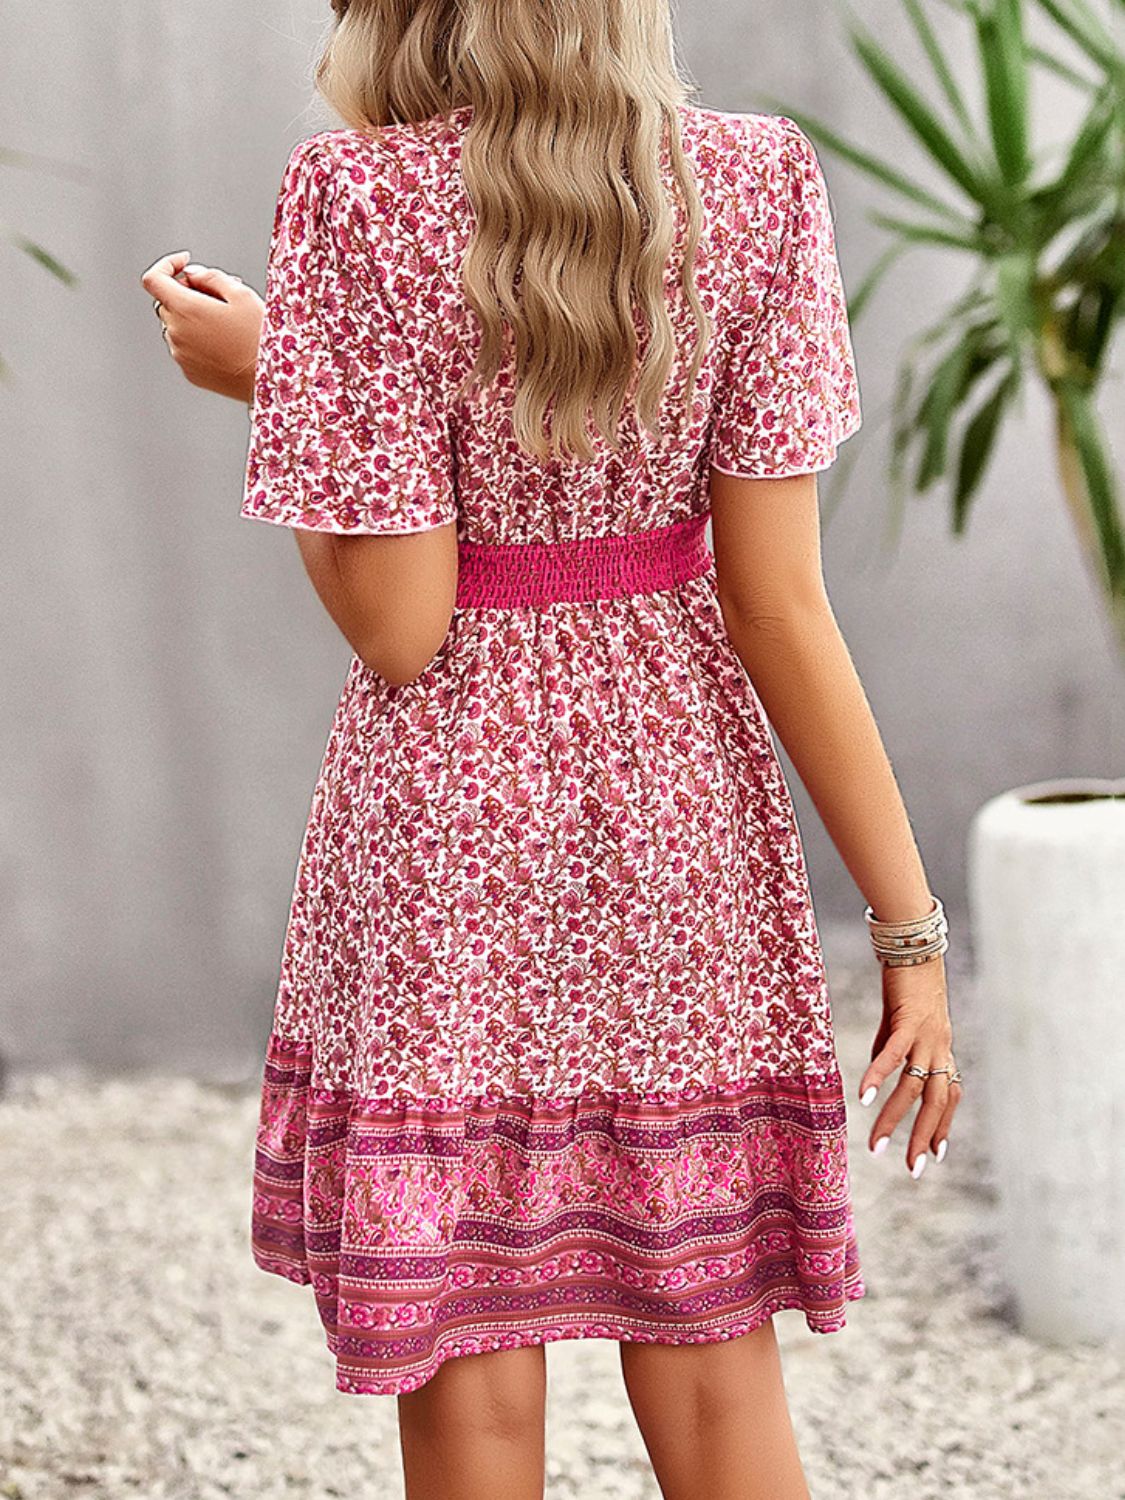 Gray Floral Print Bohemian Style V-Neck Flutter Sleeve Dress Sentient Beauty Fashions Apparel & Accessories